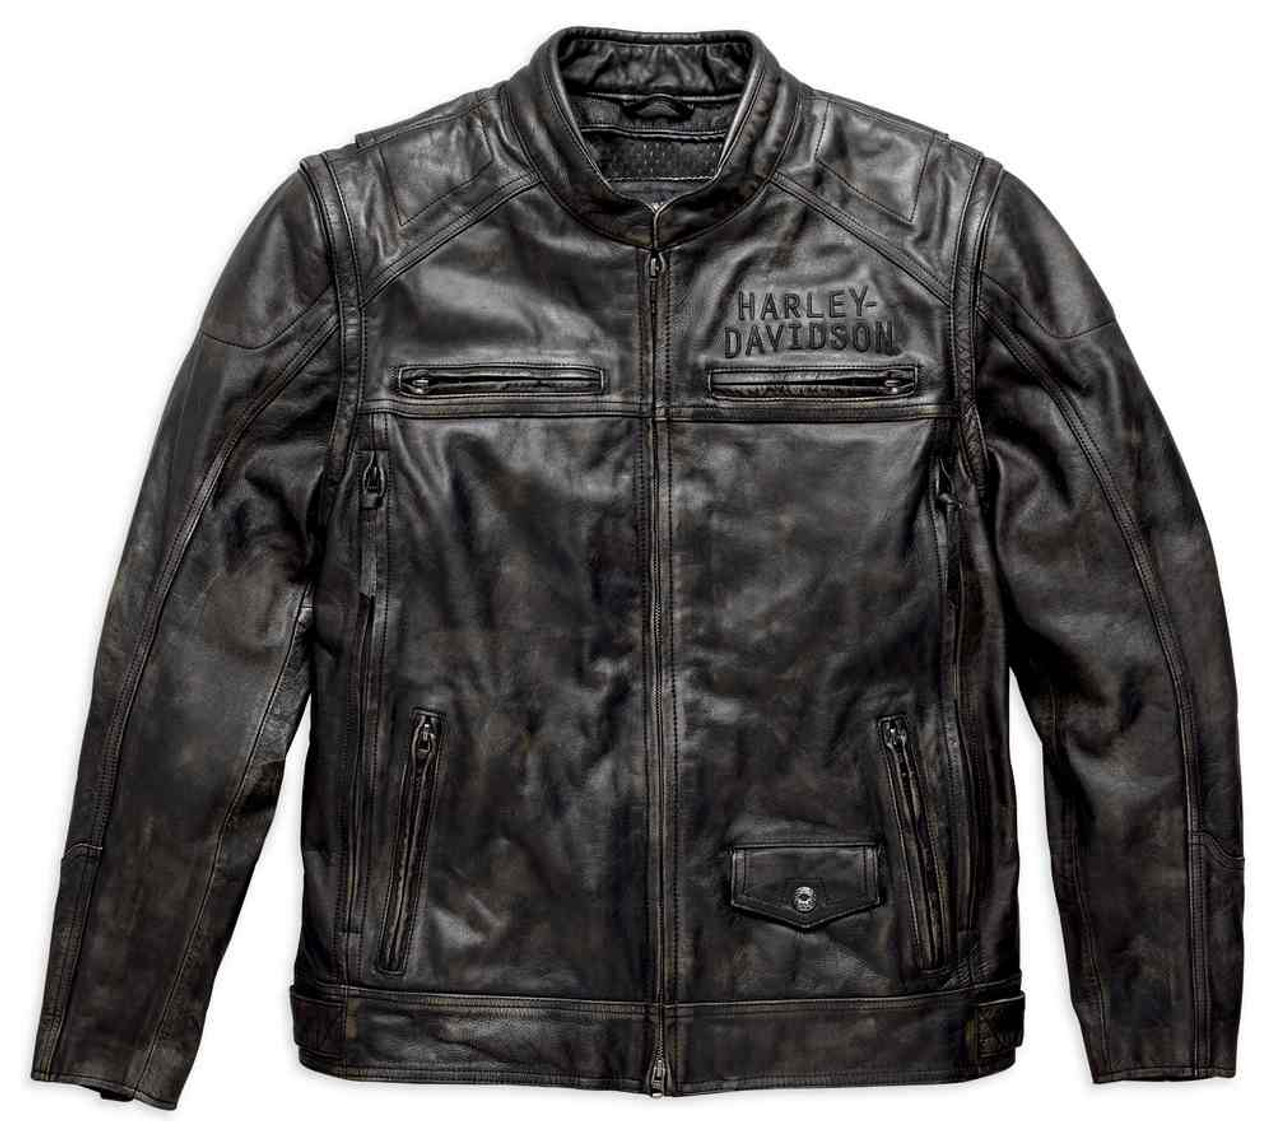 Convertible Leather Jacket